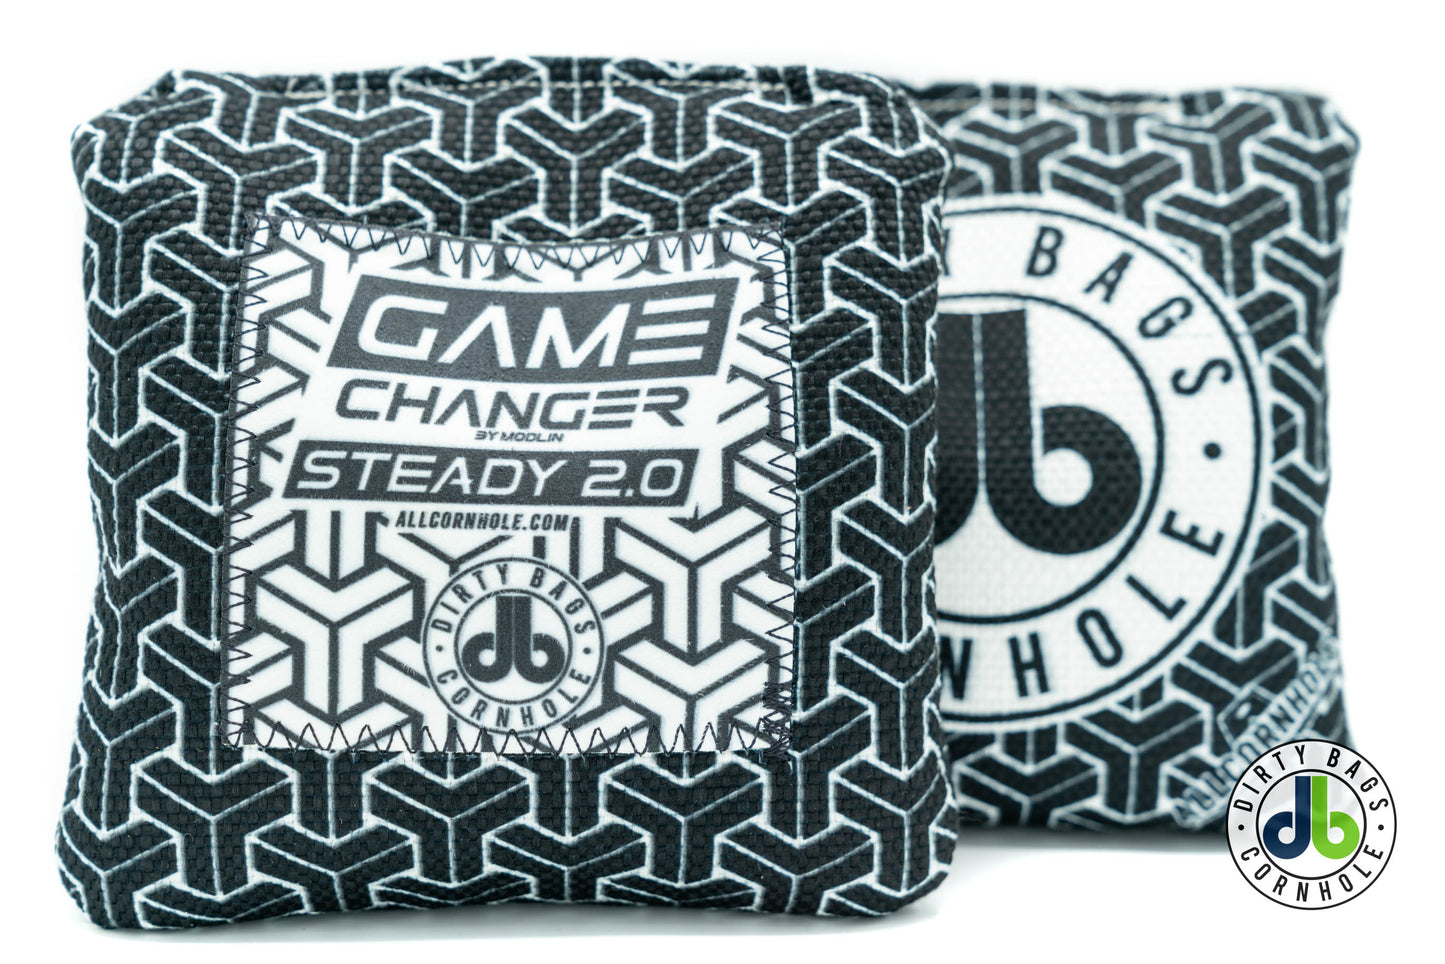 Game Changer Steady 2.0 - Dirty Bags Trophy Edition (Set of 4)